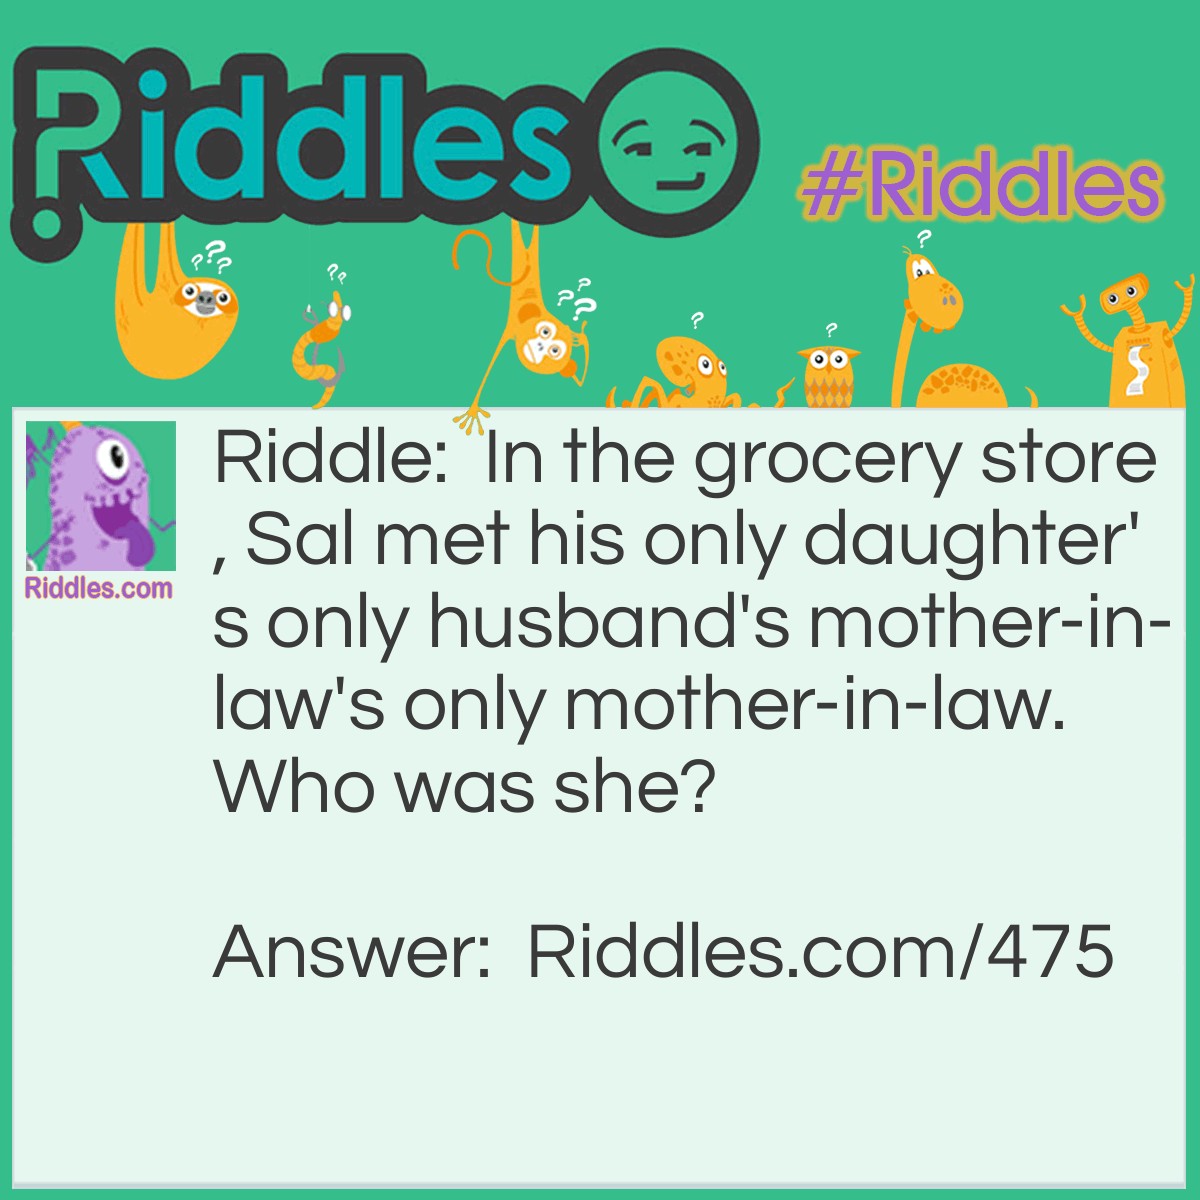 Riddle: In the grocery store, Sal met his only daughter's only husband's mother-in-law's only mother-in-law. Who was she? Answer: Sal's mother. (His son-in-law's mother-in-law was his wife; her mother-in-law was Sal's mother.)